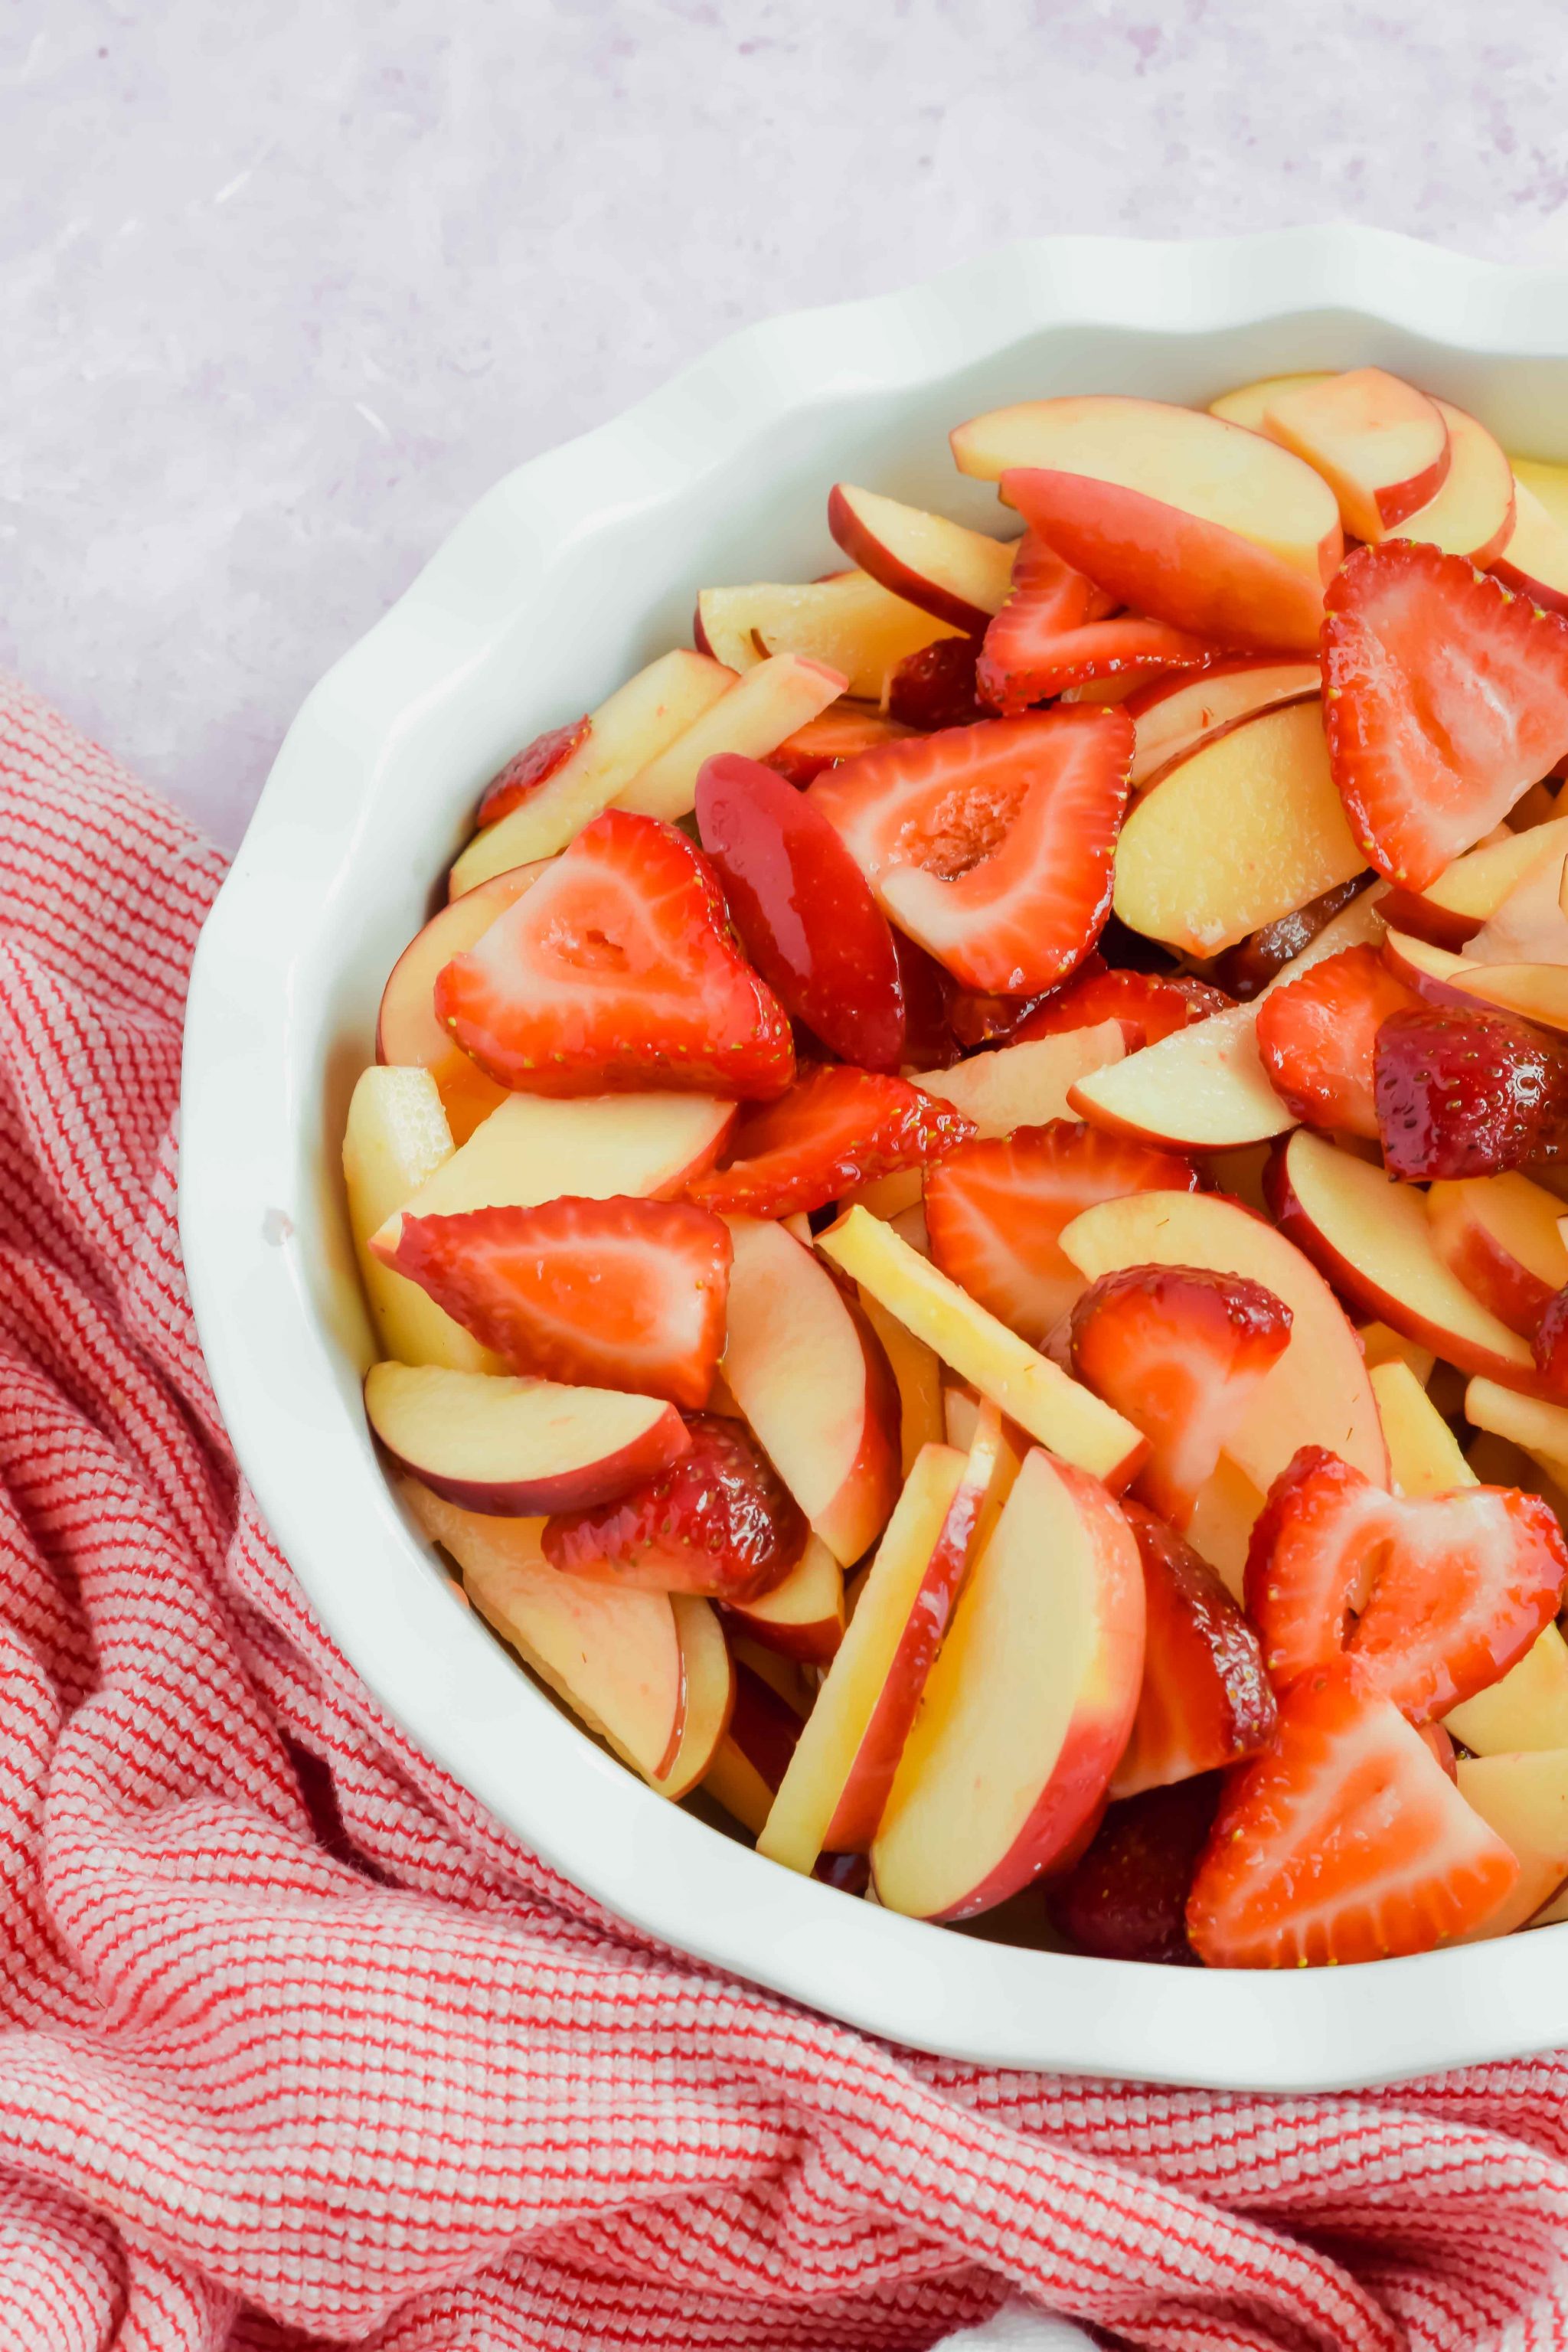 sliced apples and strawberries in white pie dish beside red and white striped dish towel.